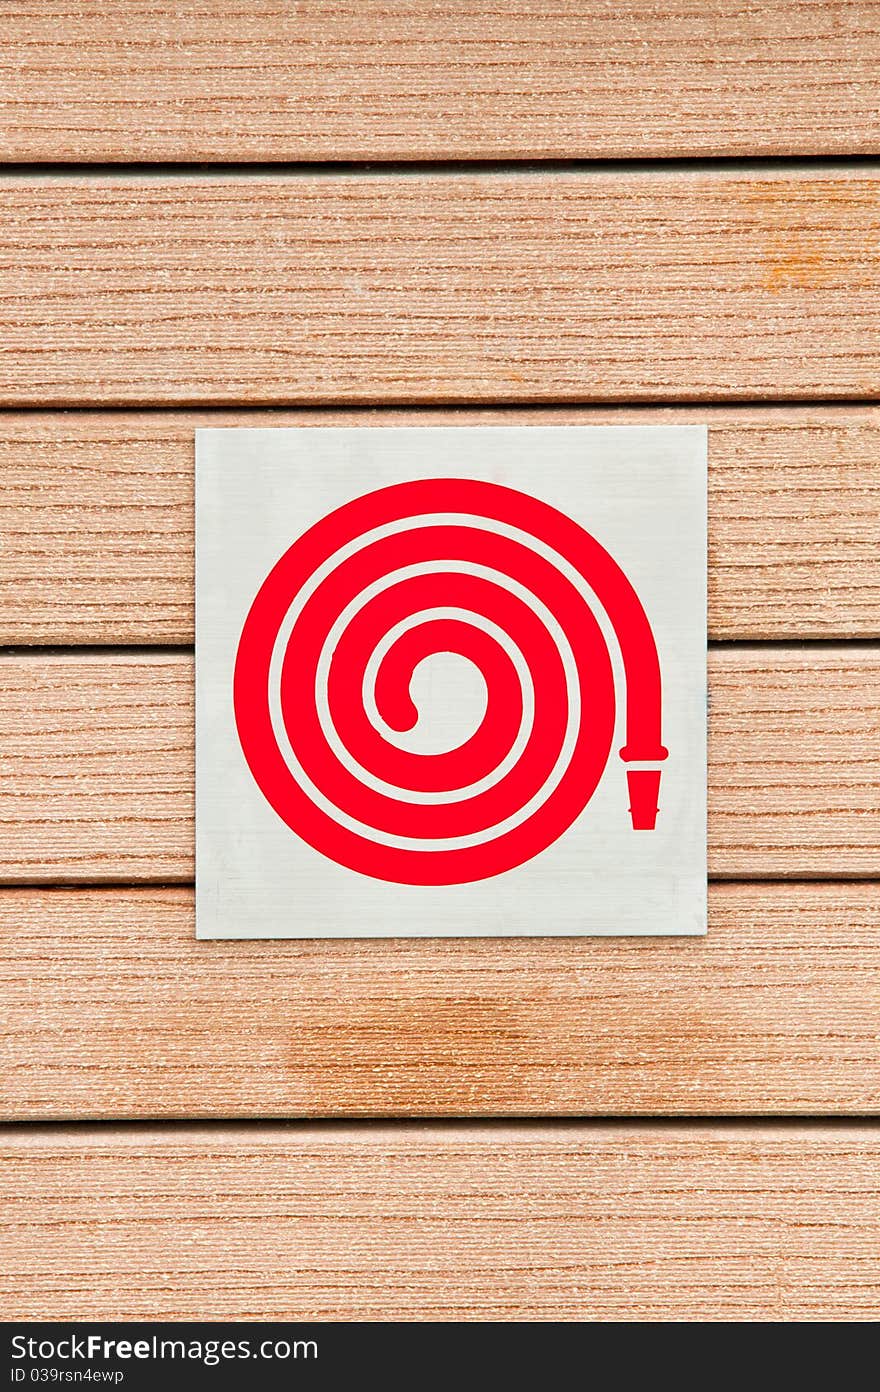 Fire hose symbol on a wooden background